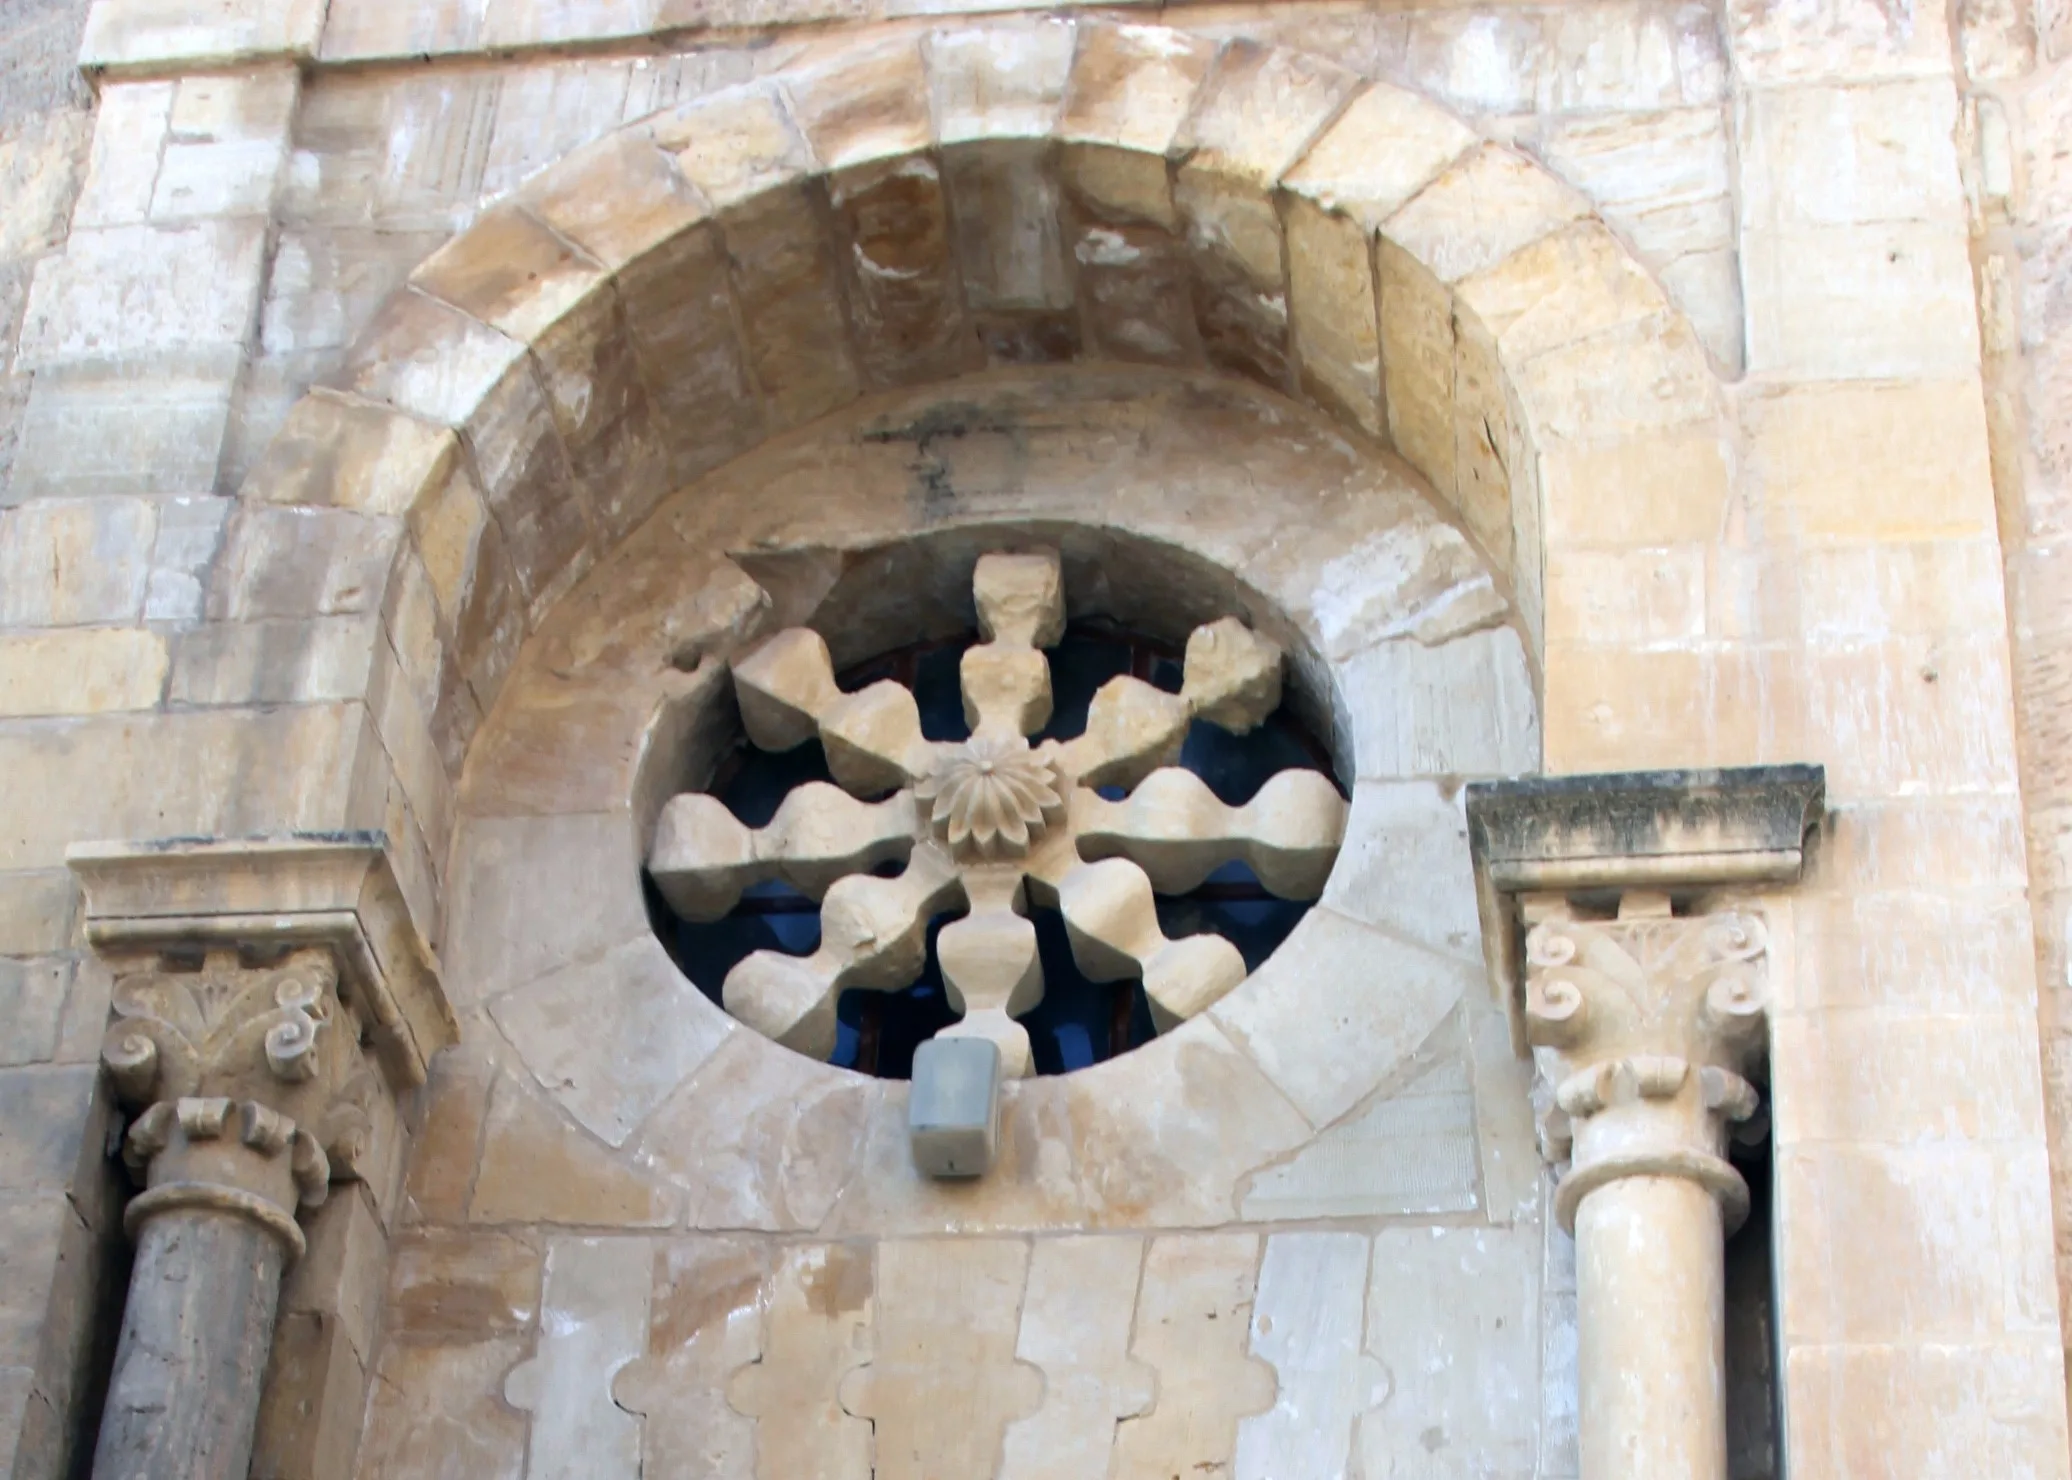 Architectural details in Hebron Old City